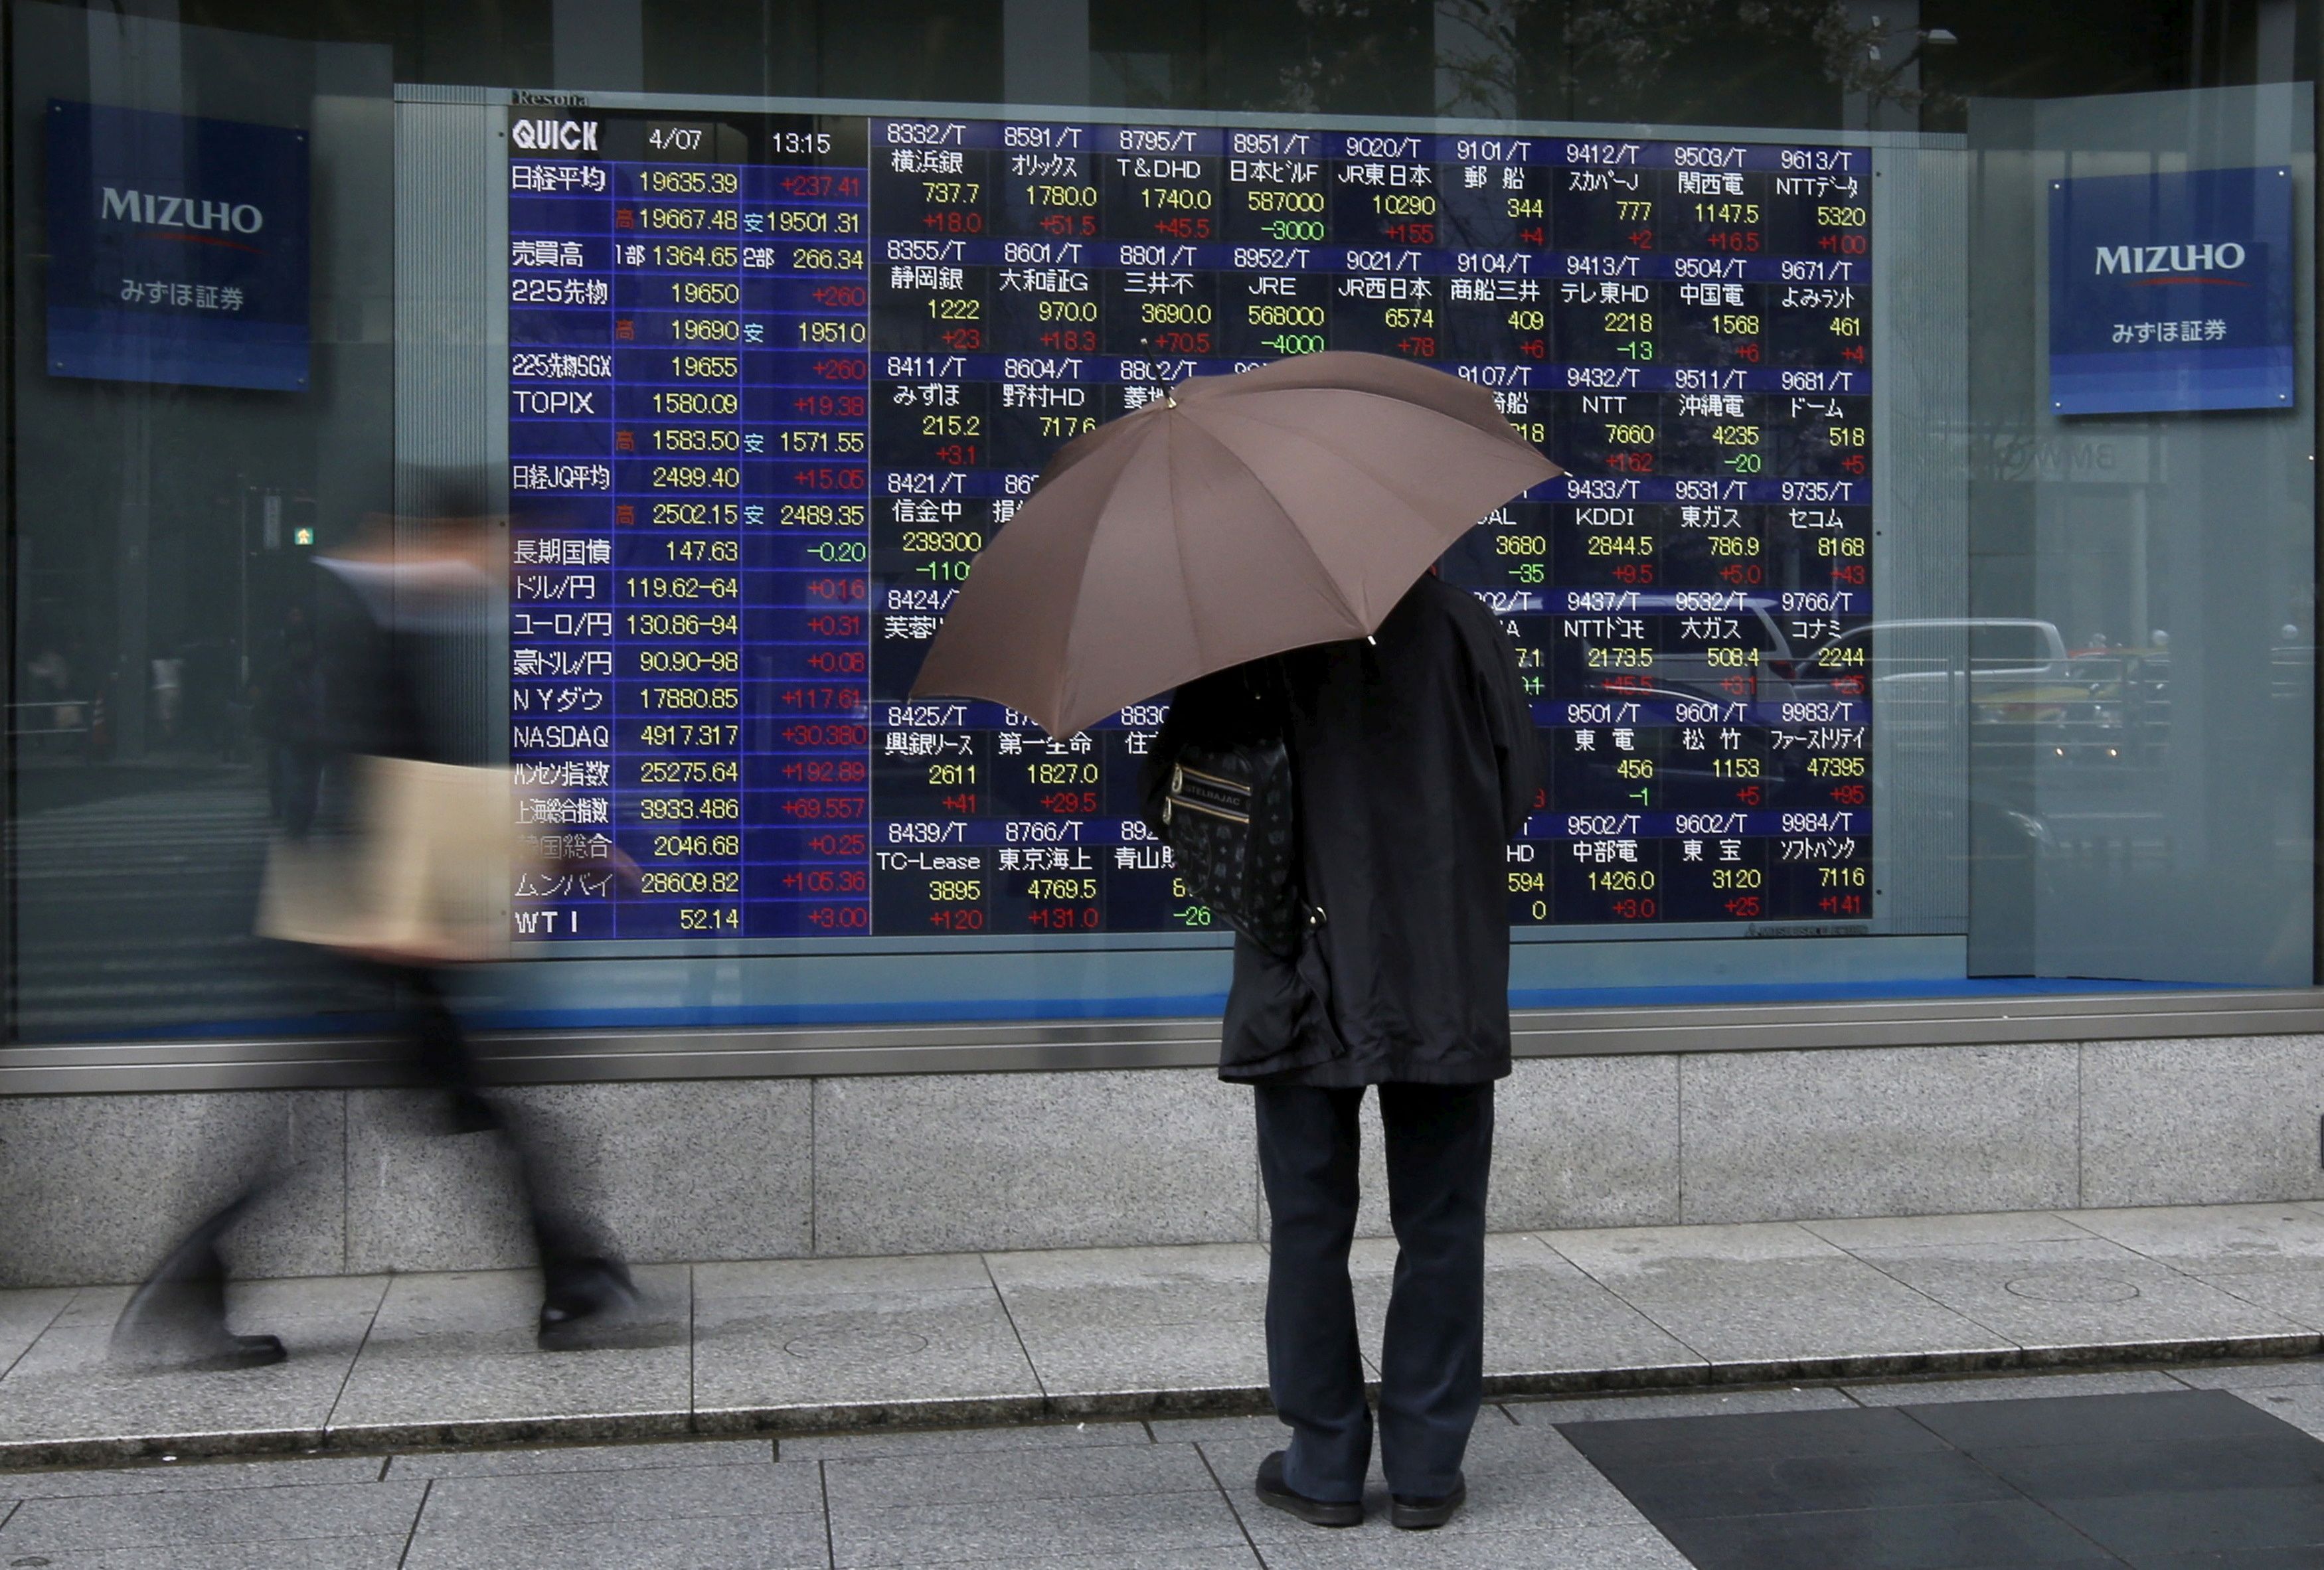 A man holding an umbrella looks at an electronic stock quotation board outside a brokerage in Tokyo